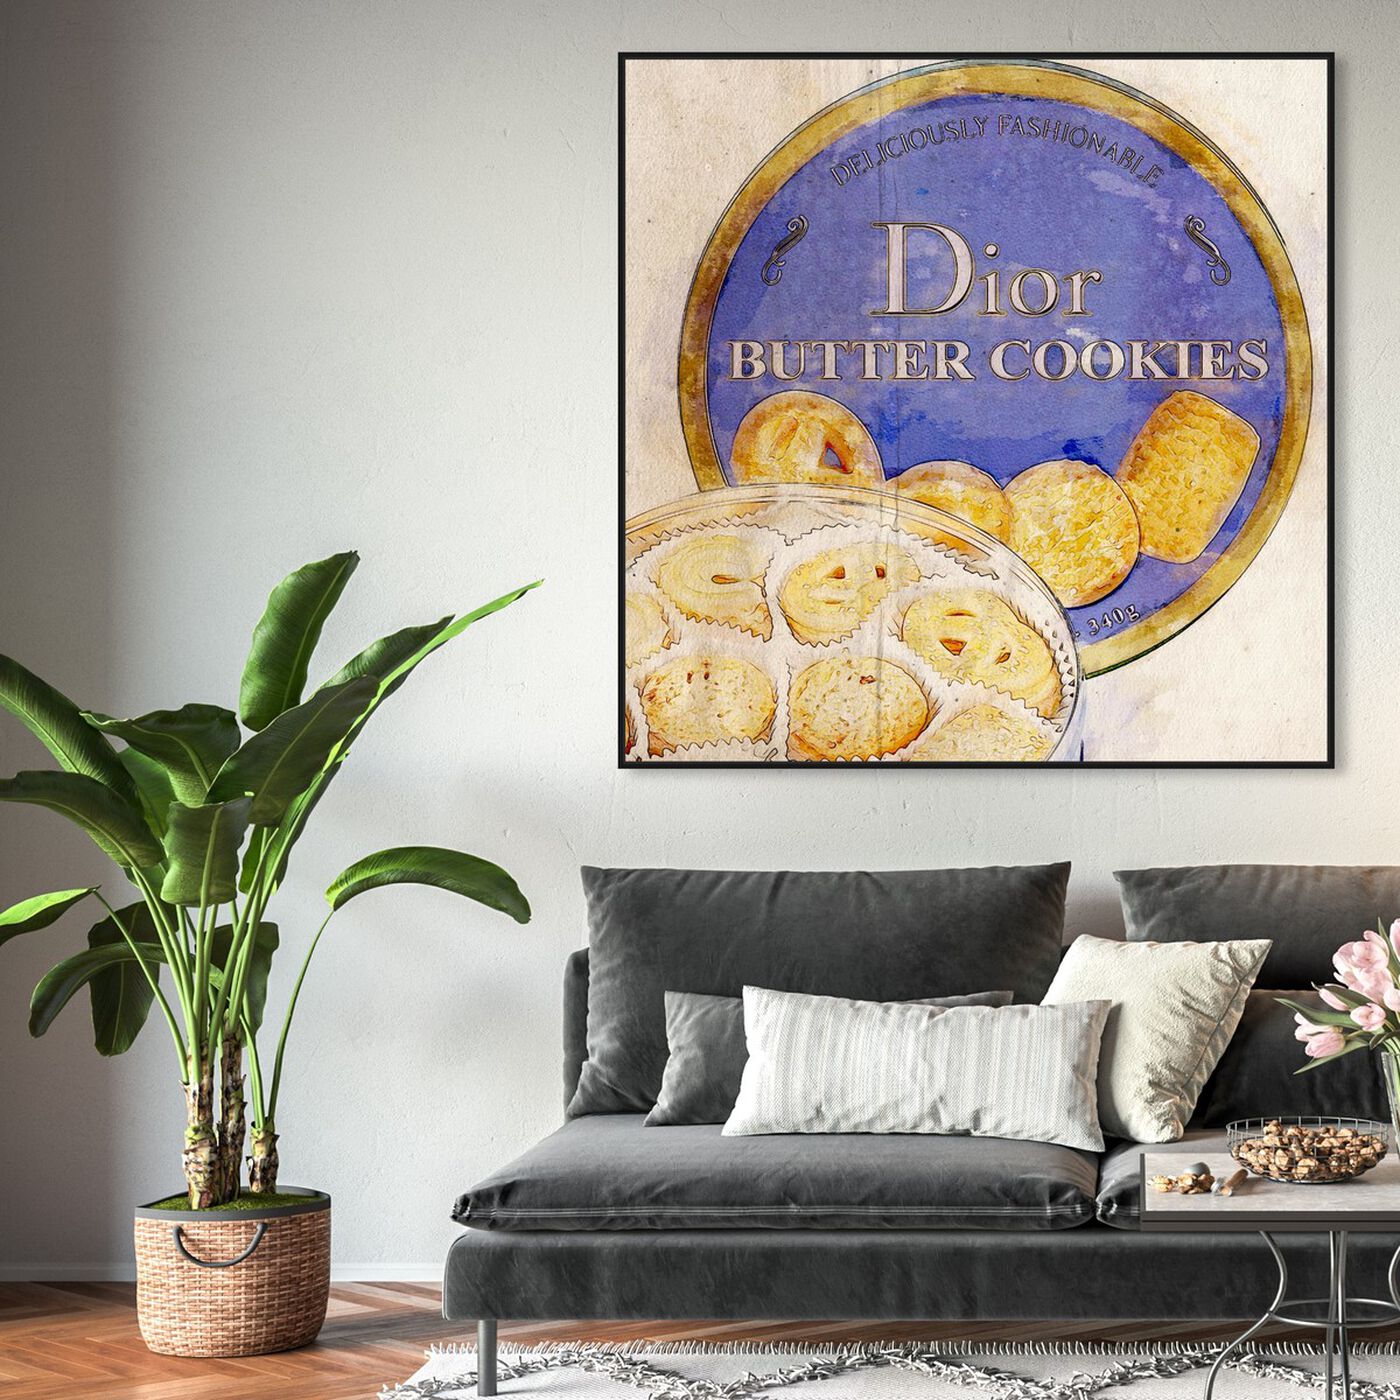 Hanging view of Deliciously Fashionable  featuring fashion and glam and lifestyle art.